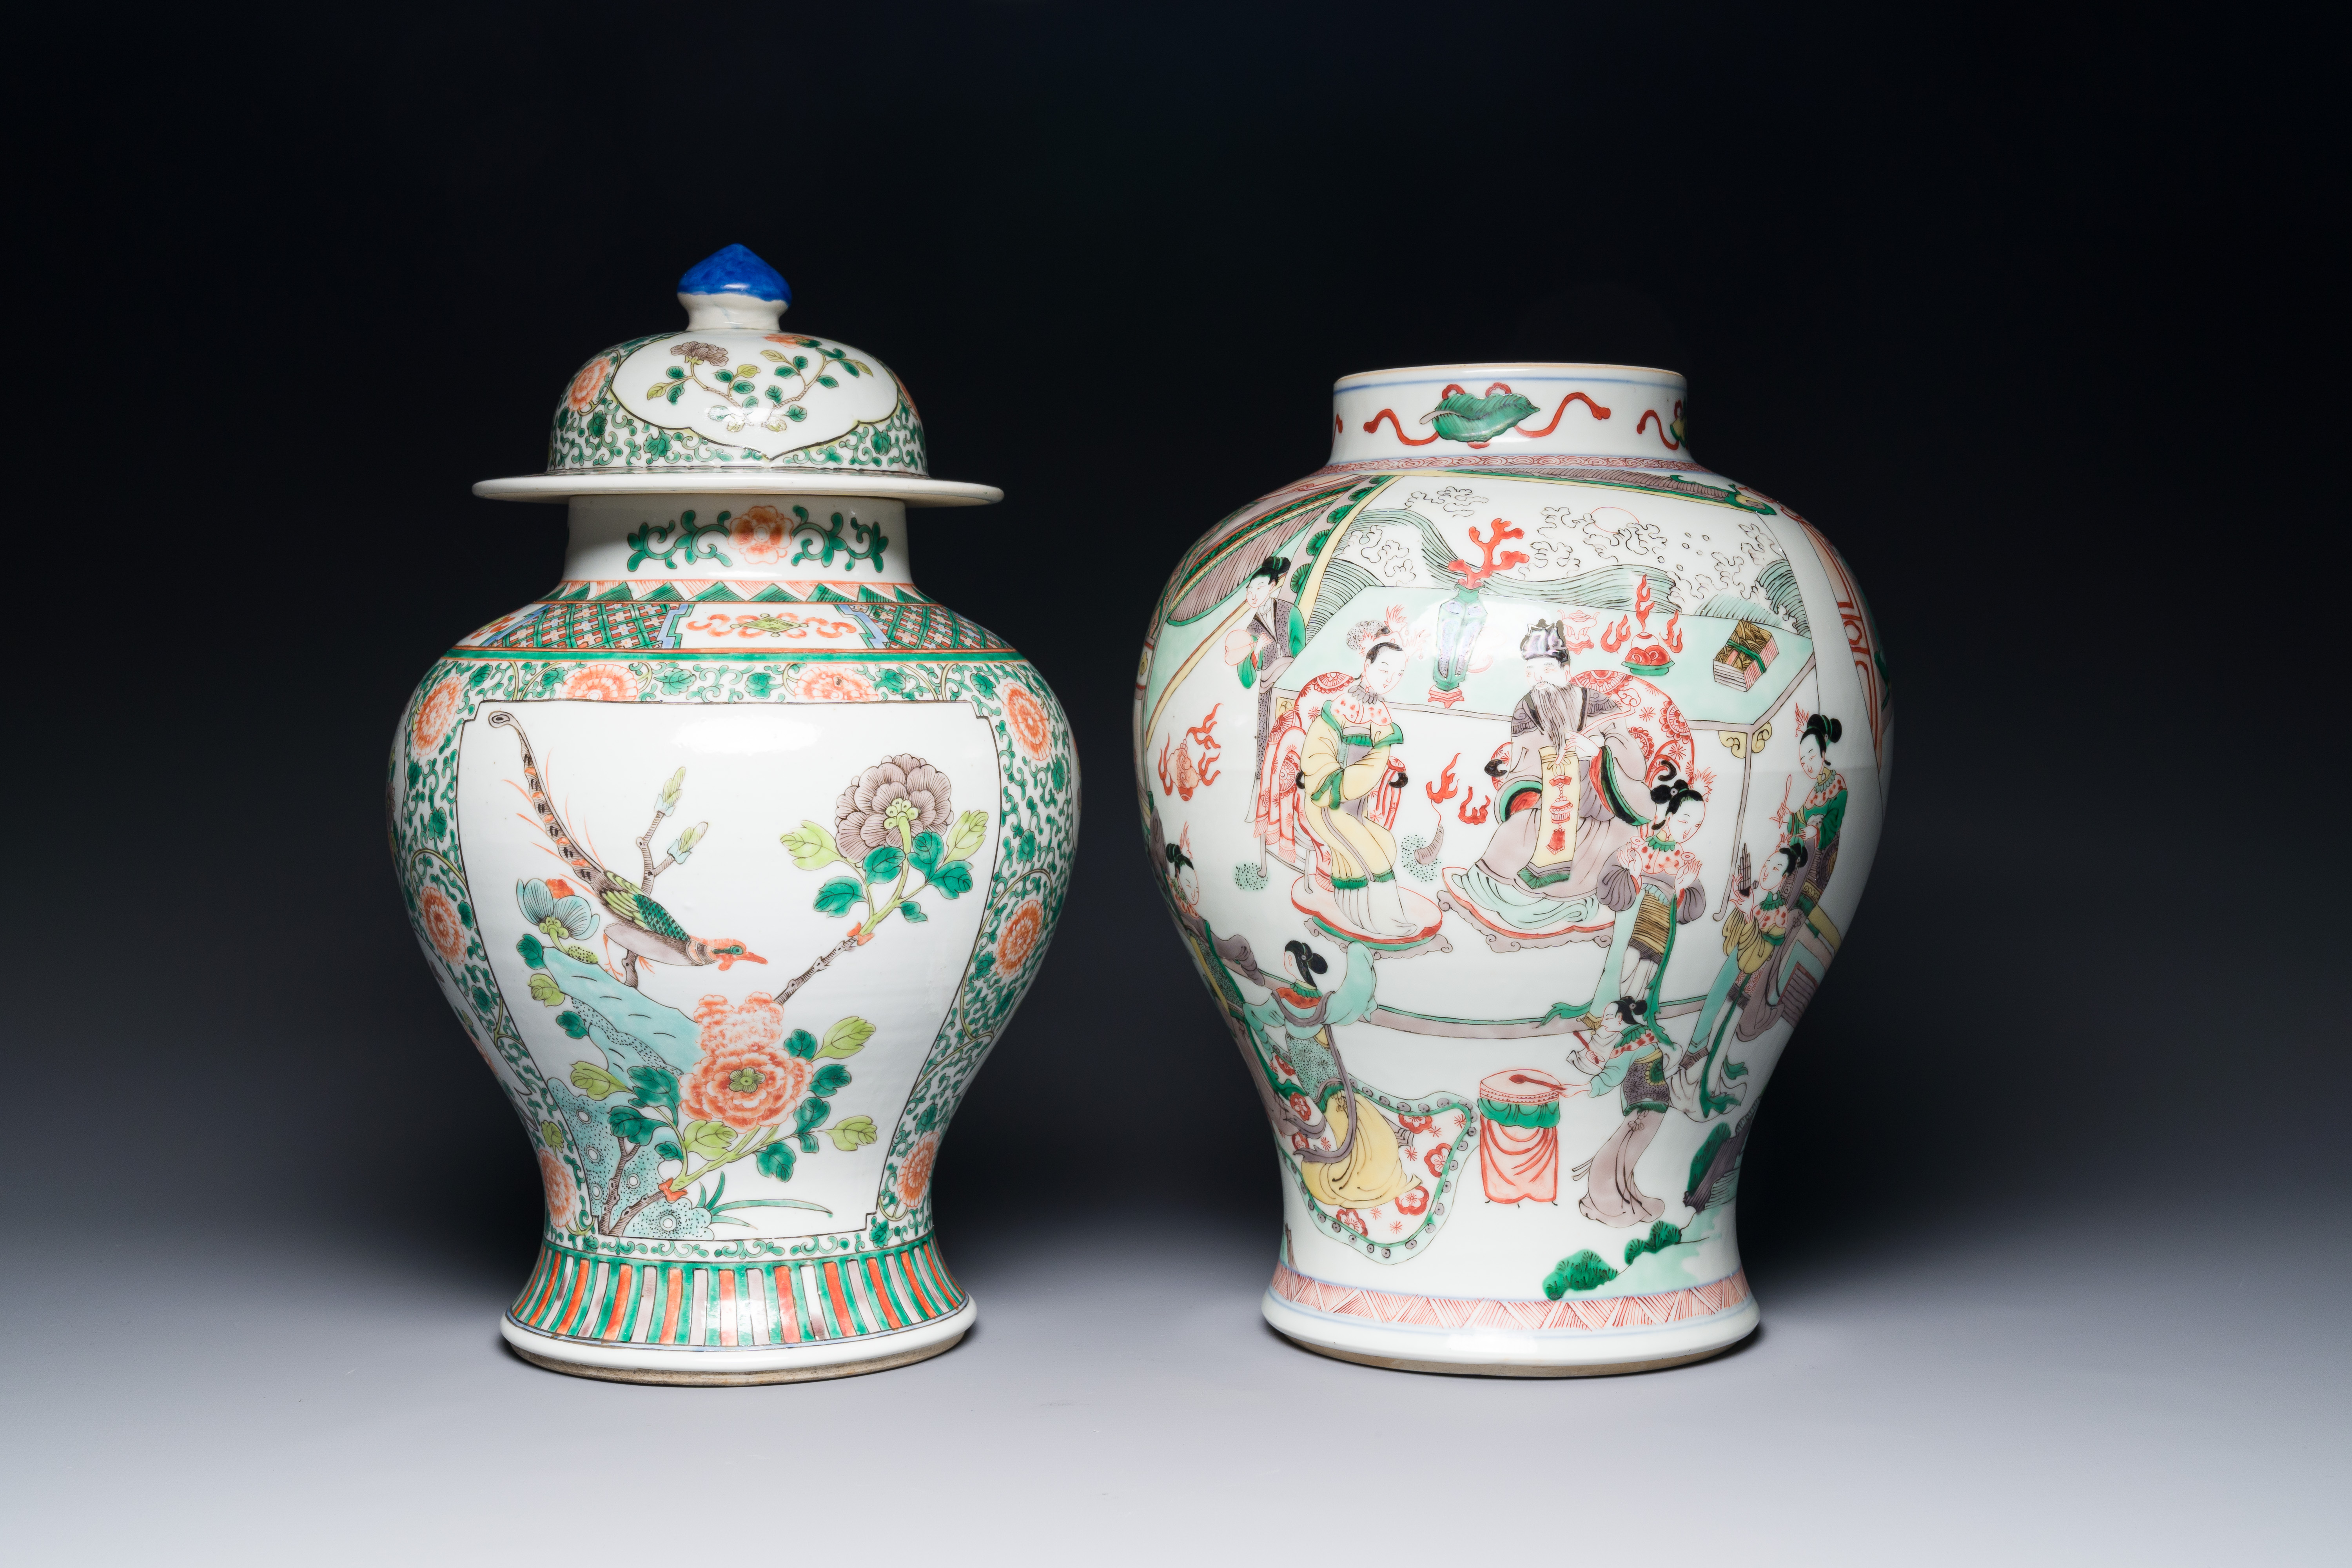 Two Chinese famille verte porcelain vases and covers on wooden stands, 19th C. - Image 2 of 4